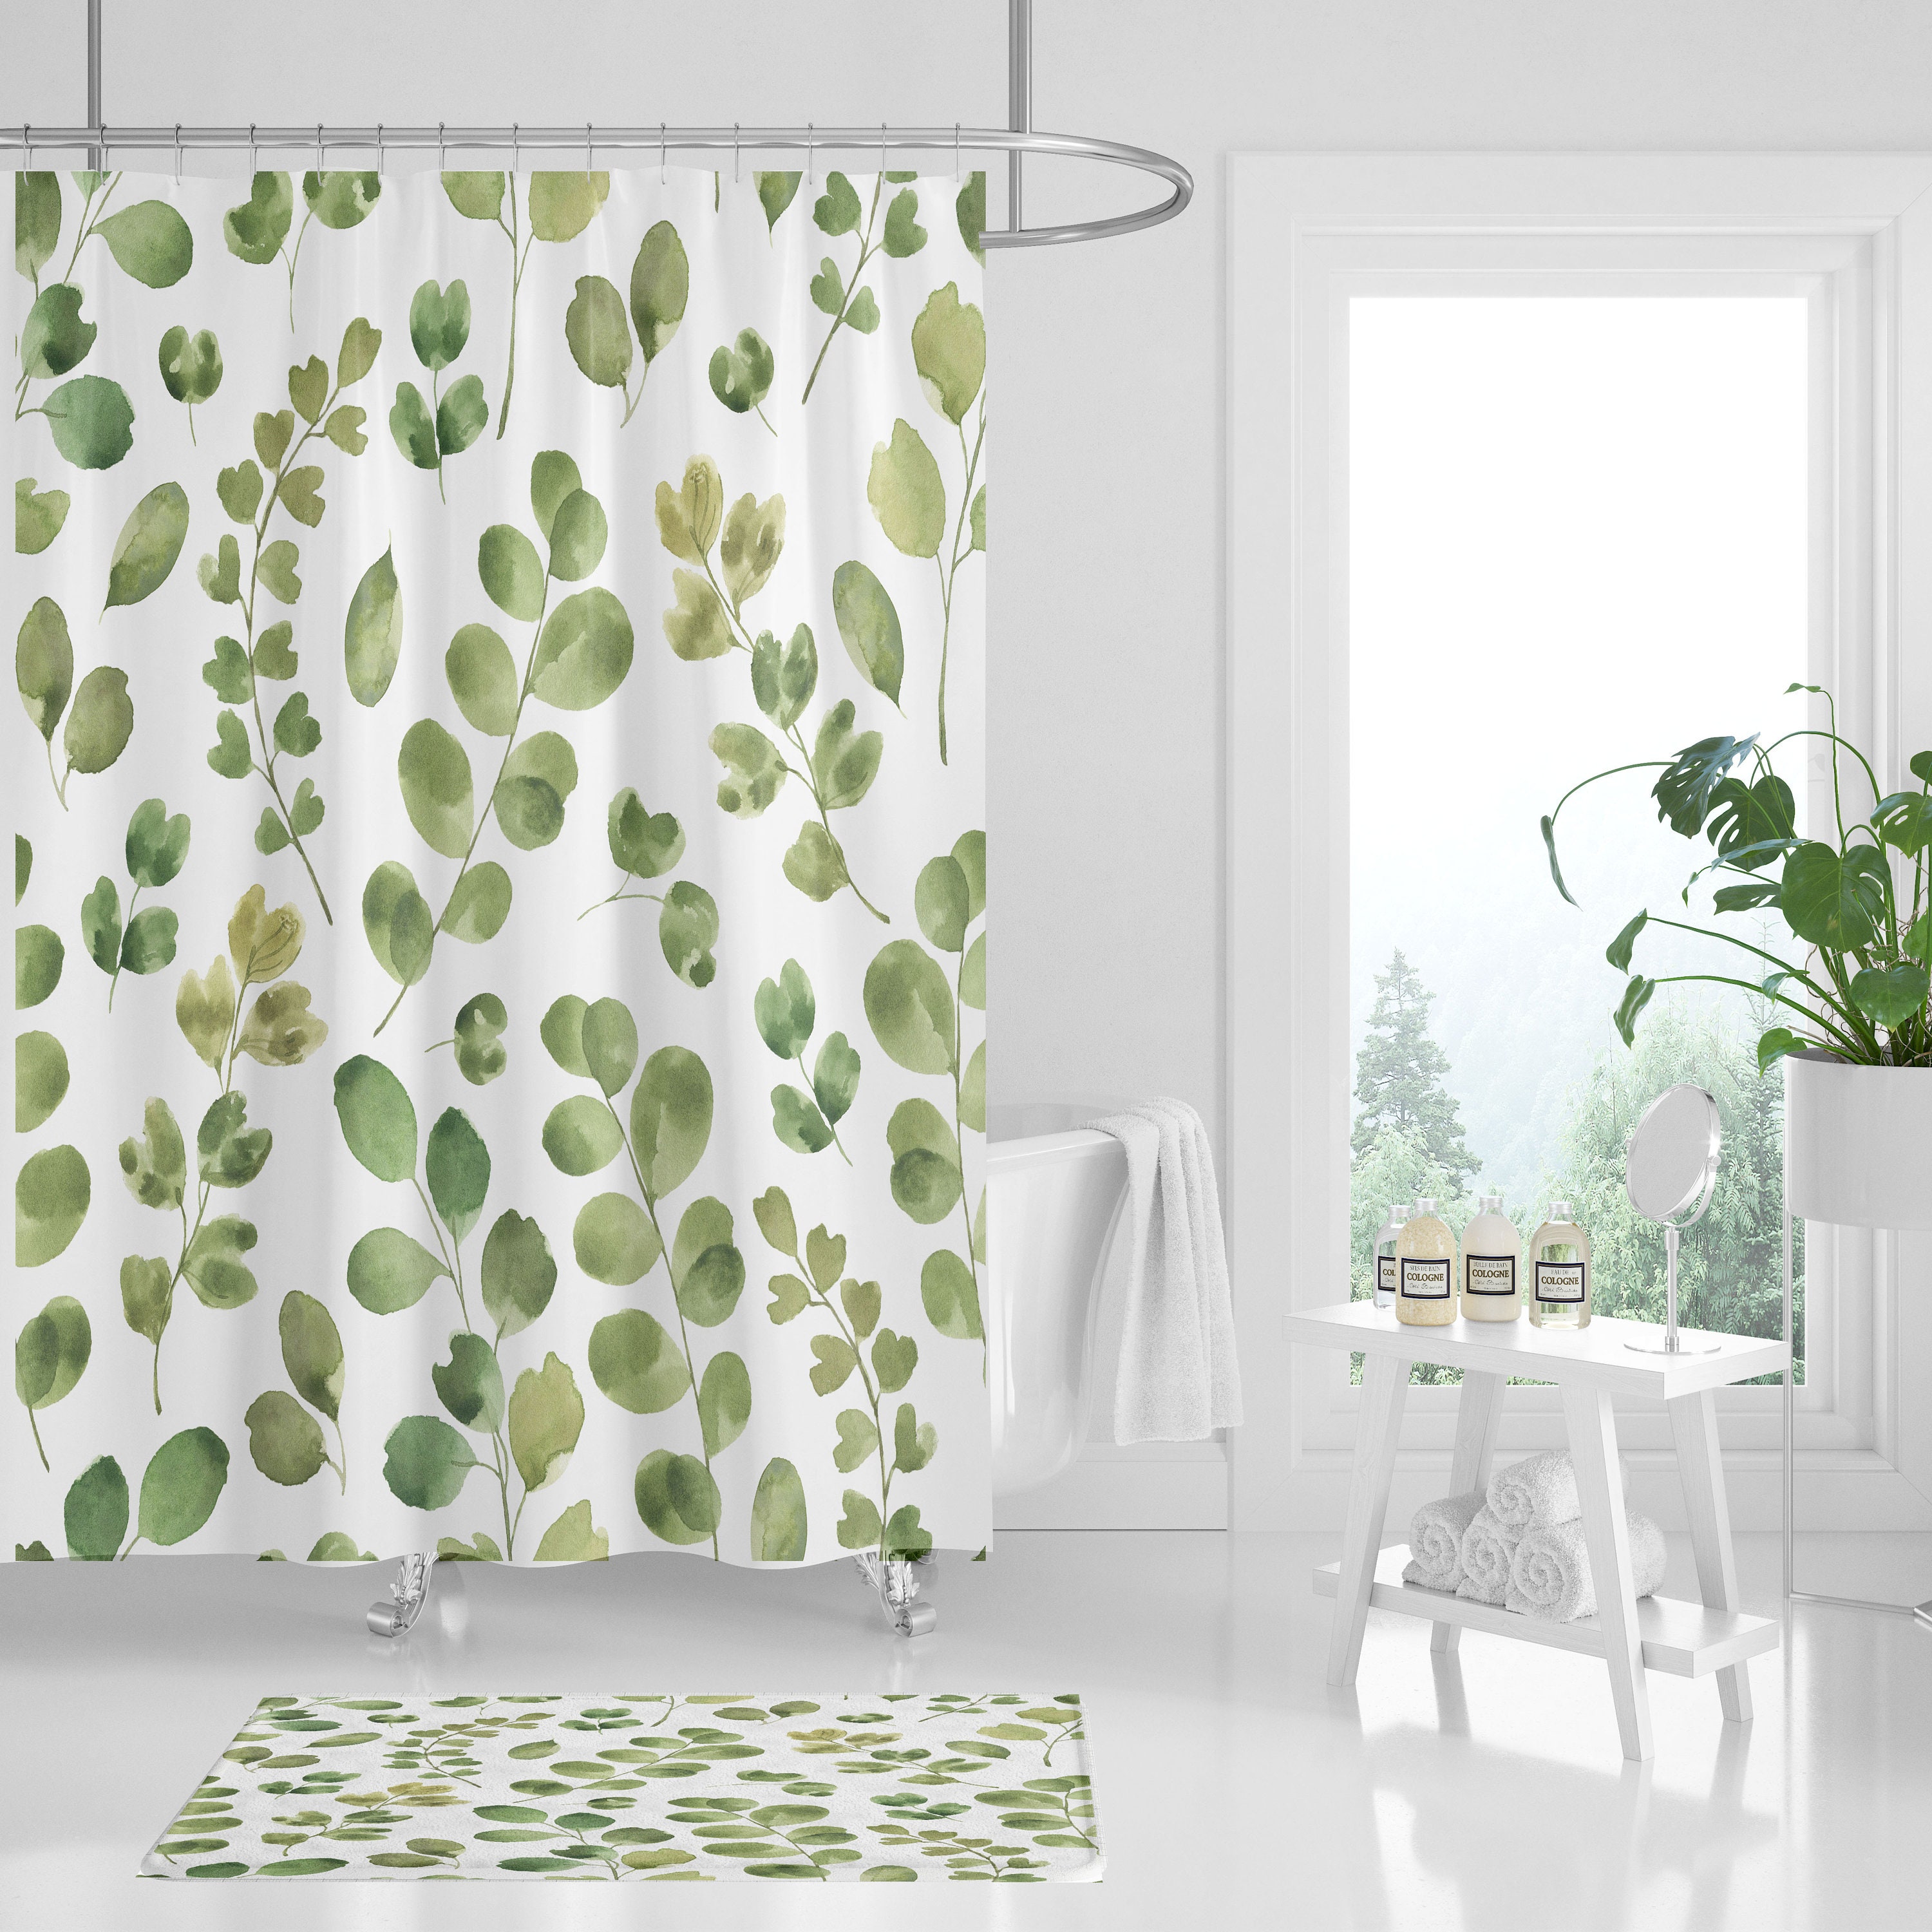 Details about   Watercolor Wisteria Green Leaves Shower Curtain & Hooks Bathroom Accessory Sets 